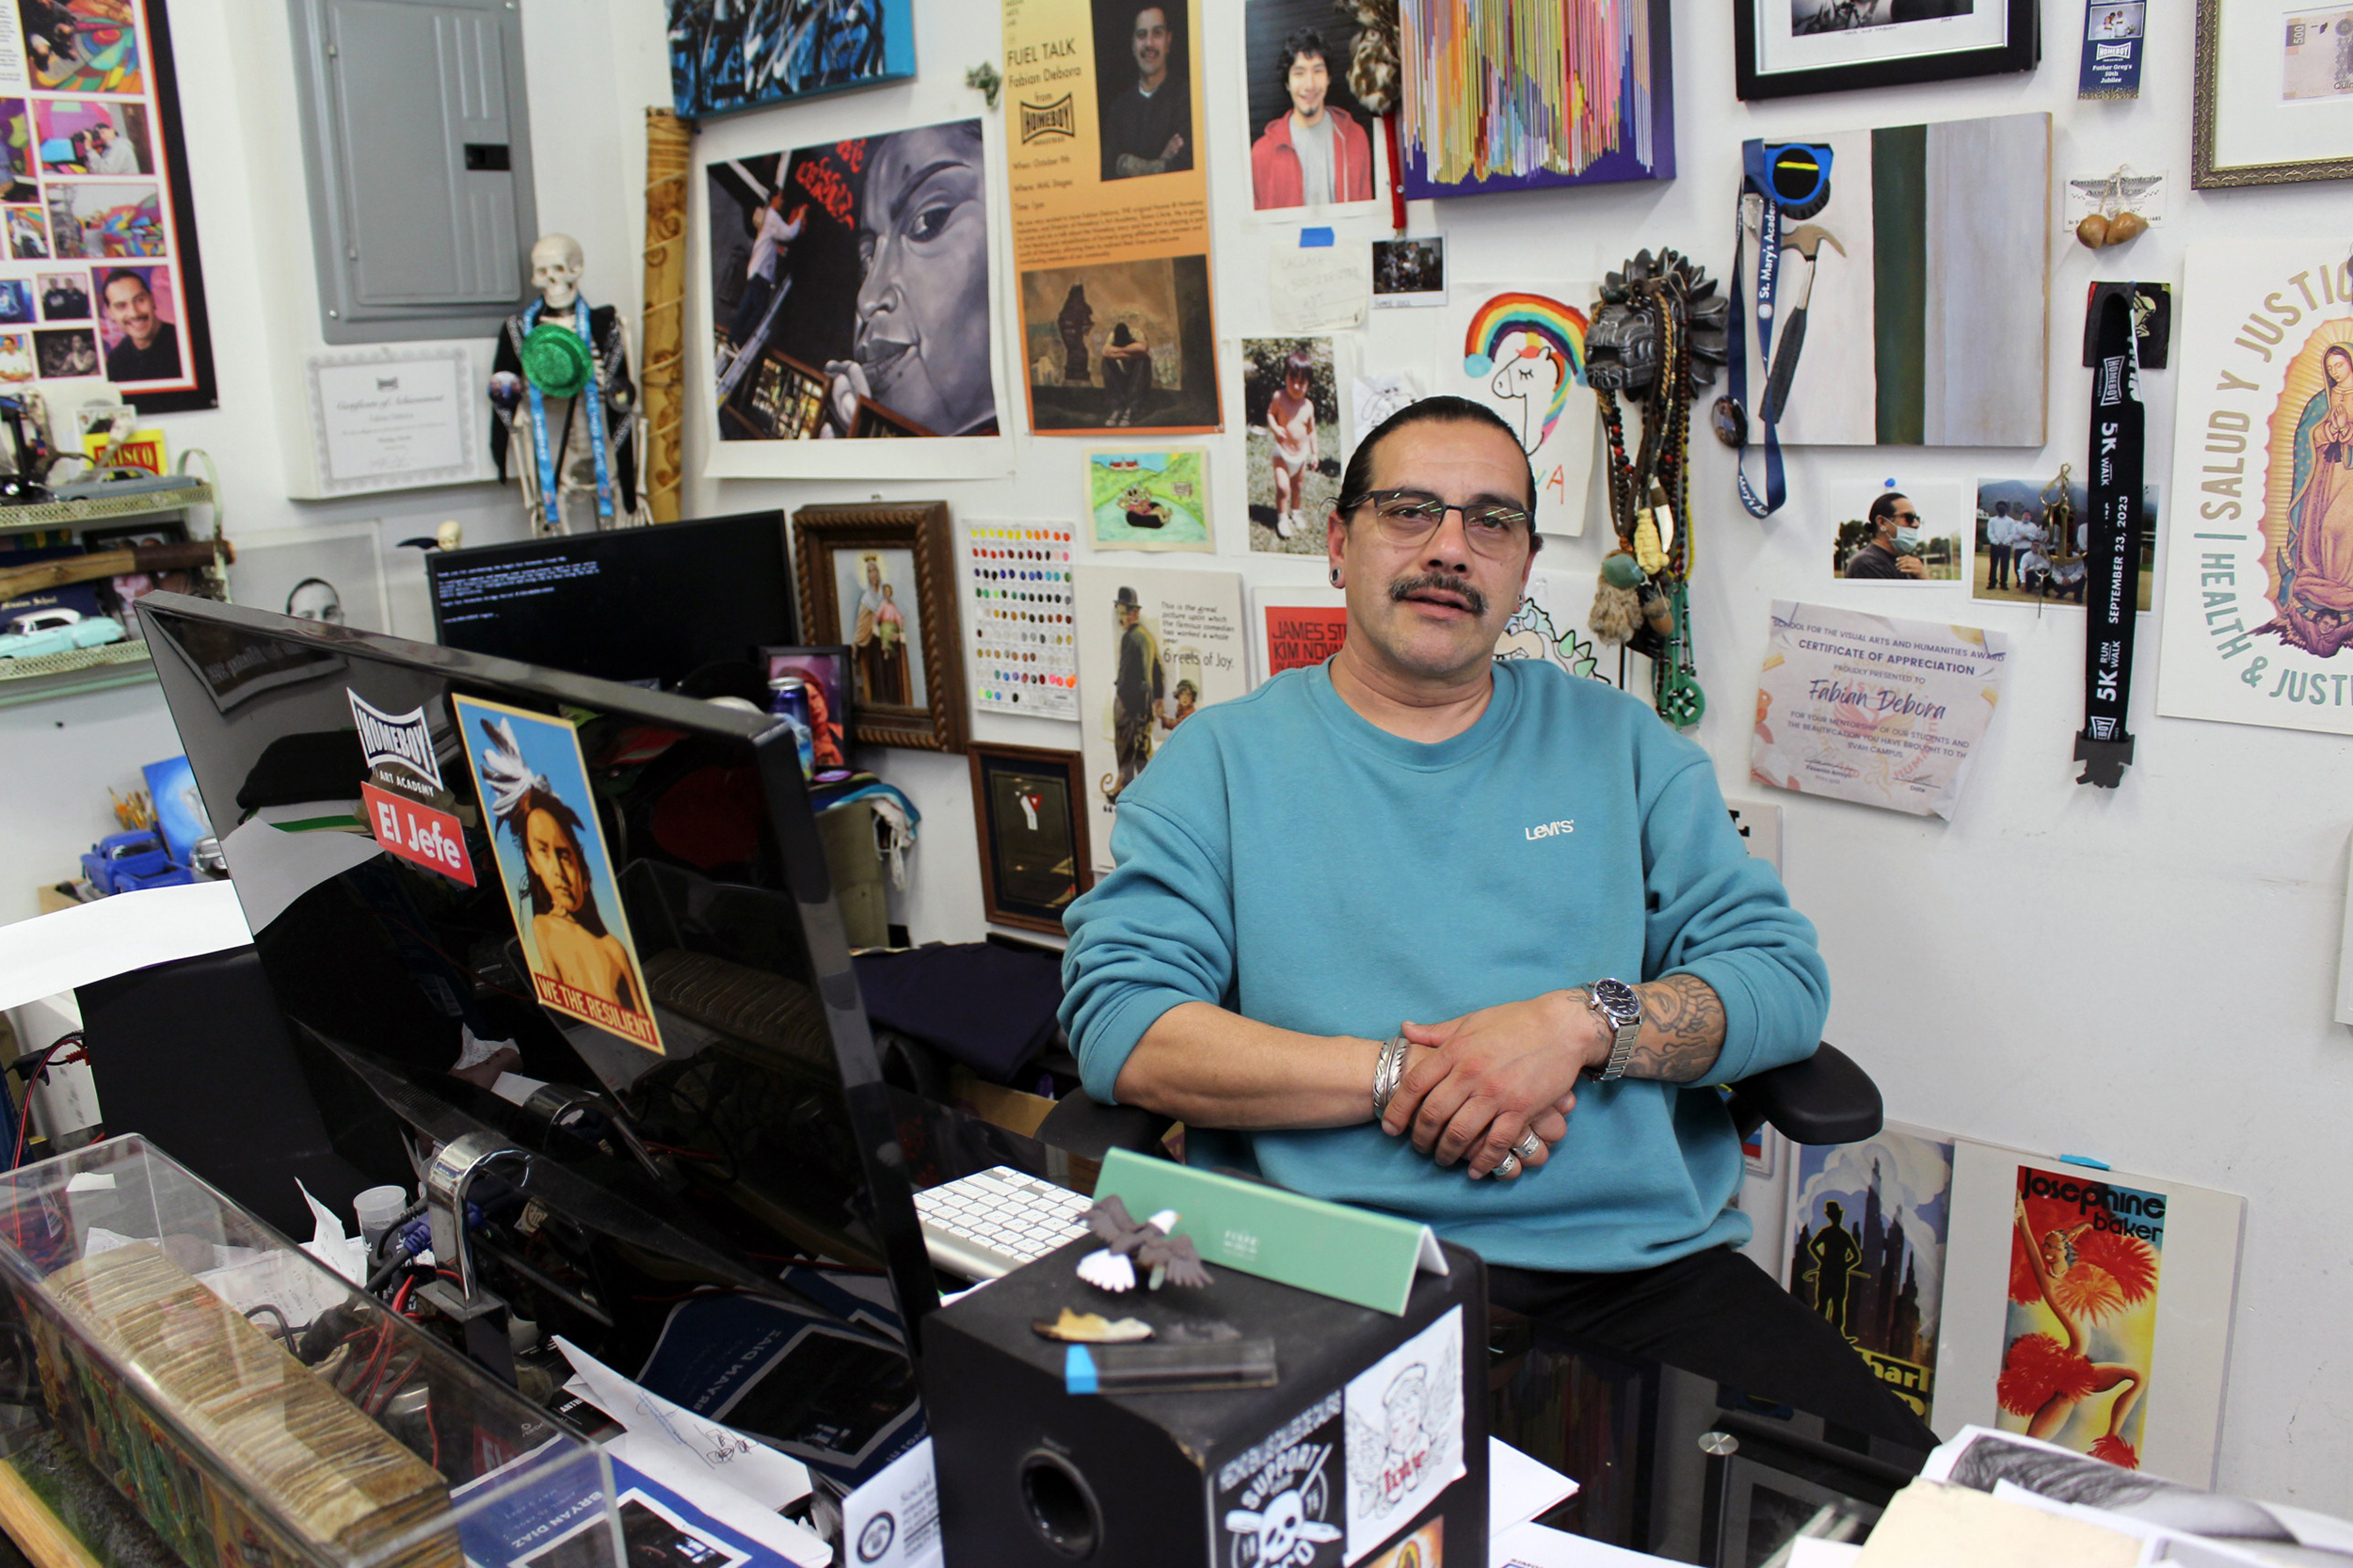 A Latino man with a mustache and glasses is wearing a teal Levi’s sweatshirt. He is sitting at a desk with art covering the walls behind him.